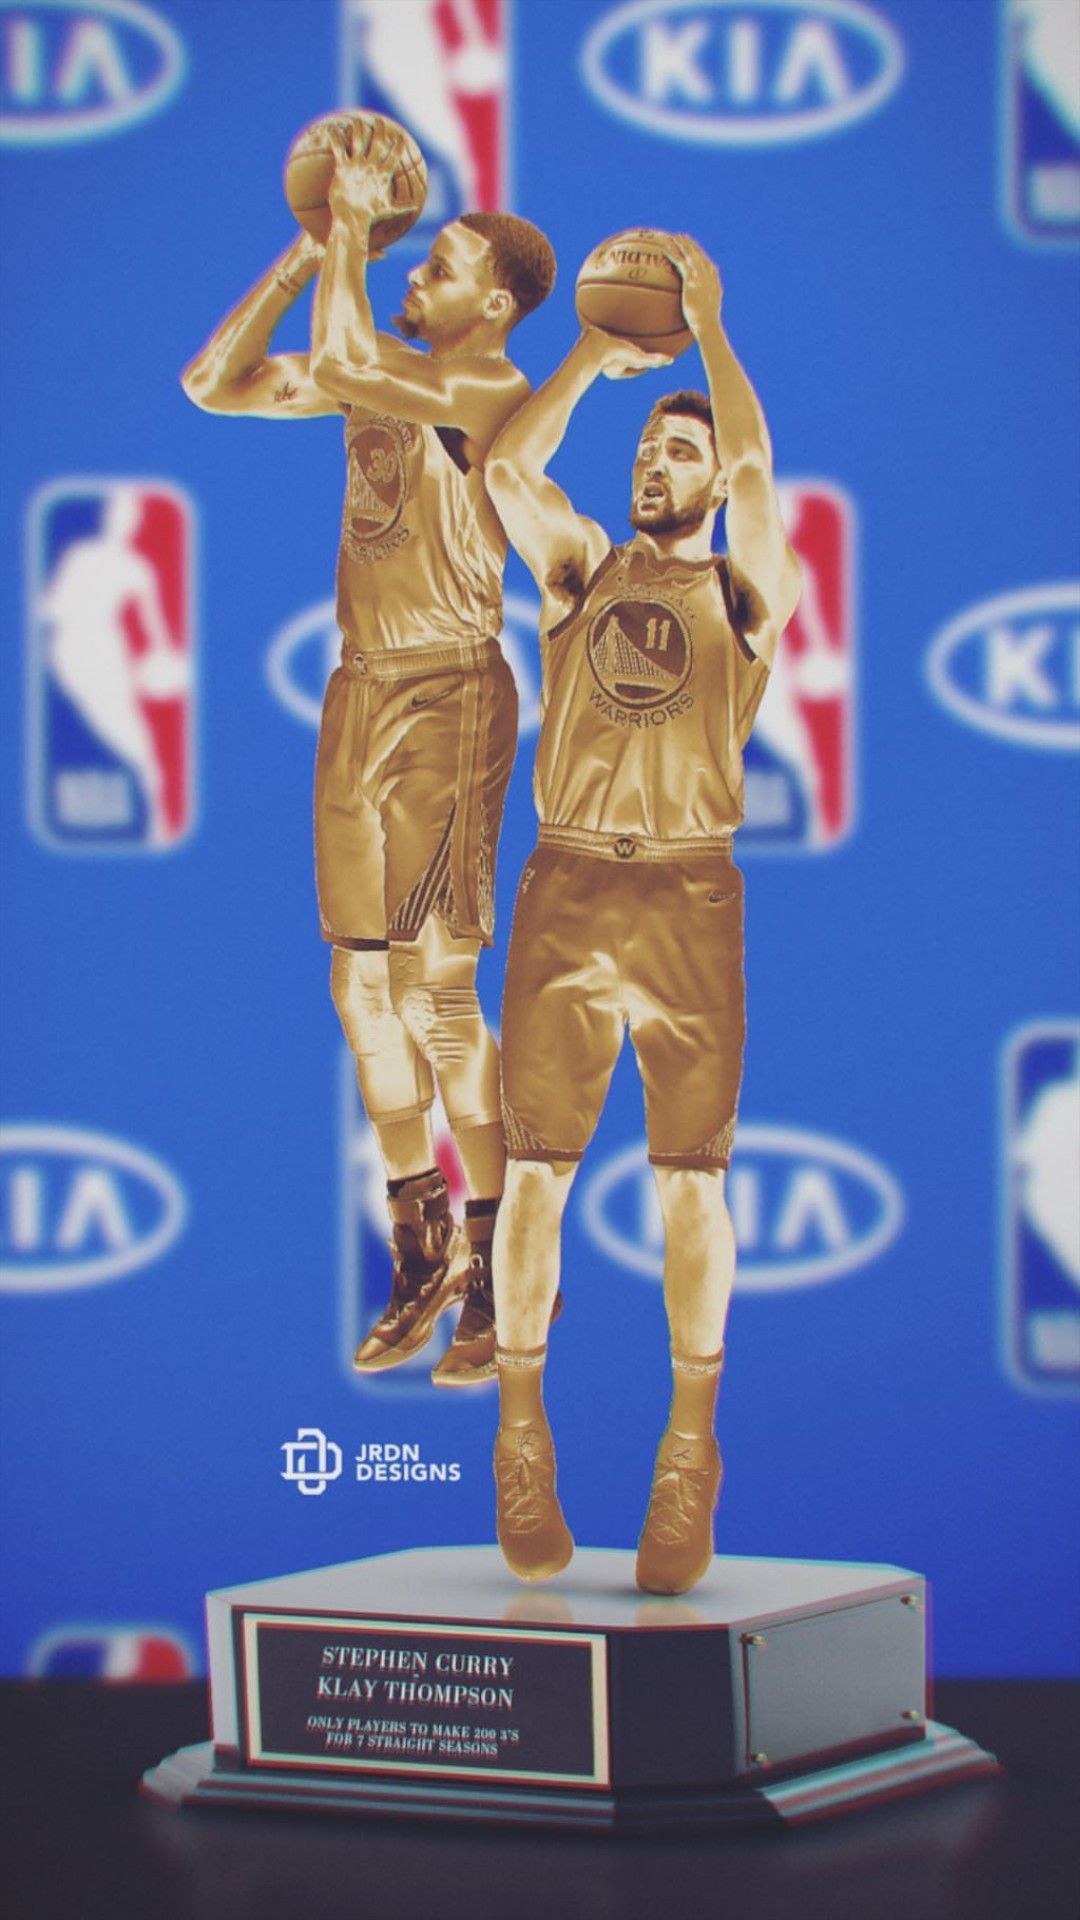 Stephen Curry and Klay Thompson wallpaper. Klay thompson, Golden state warriors wallpaper, Warriors basketball